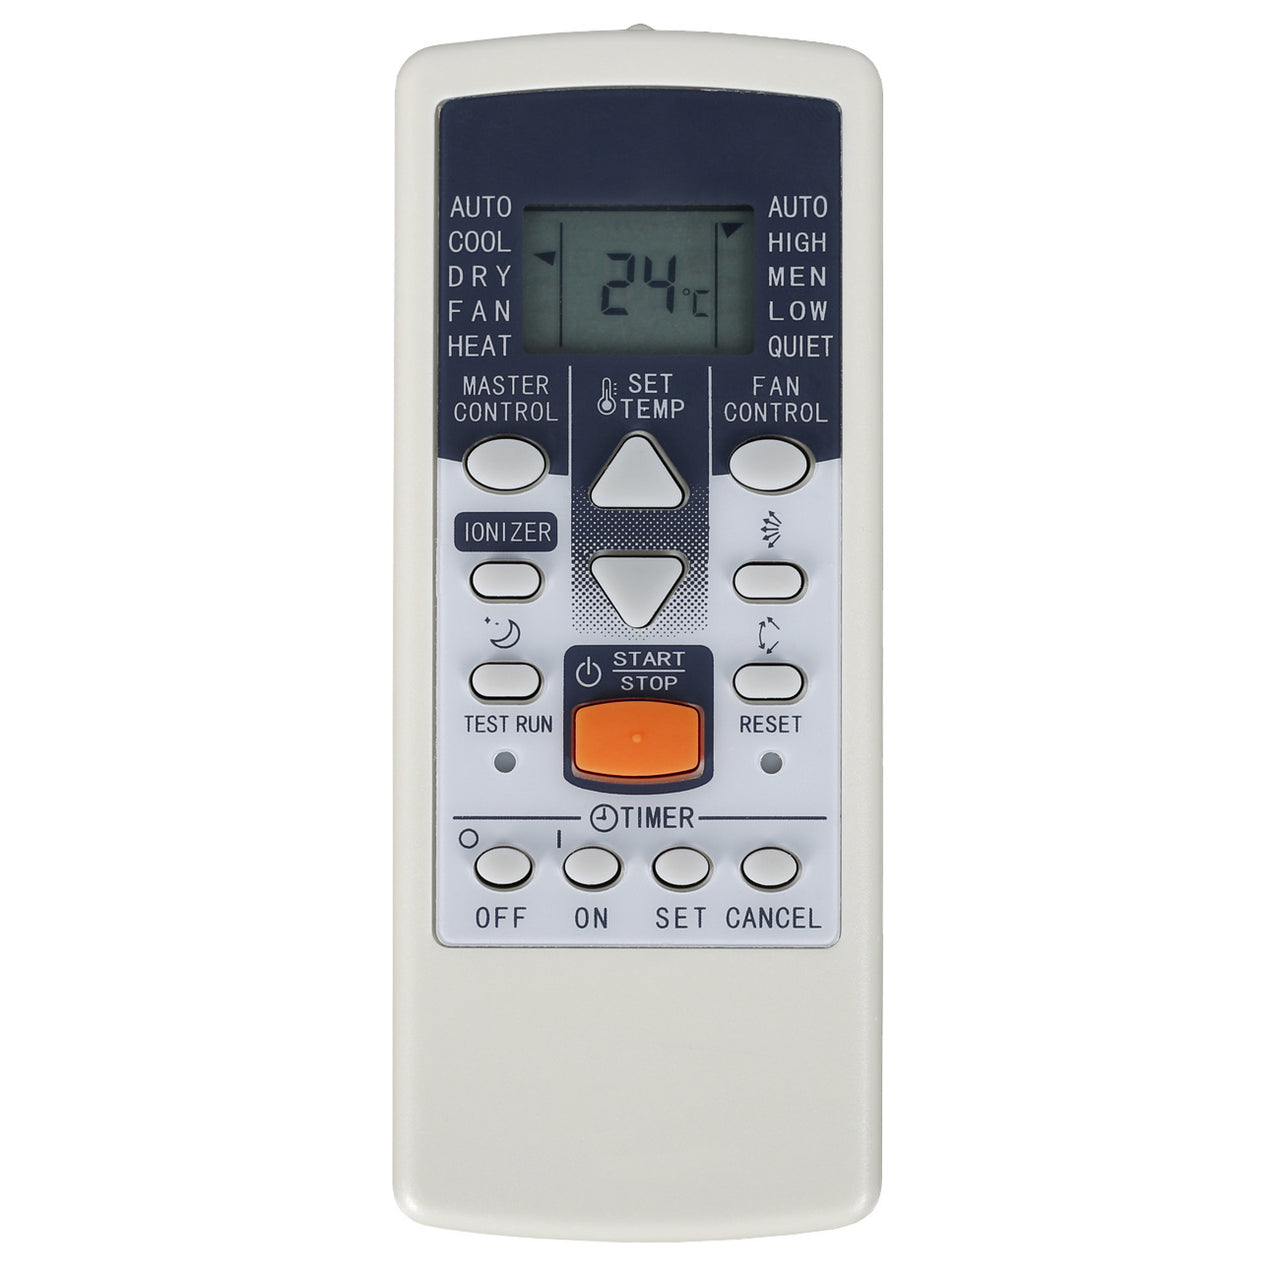 AR-PV1 Replacement Remote For Fujitsu Air Conditioners